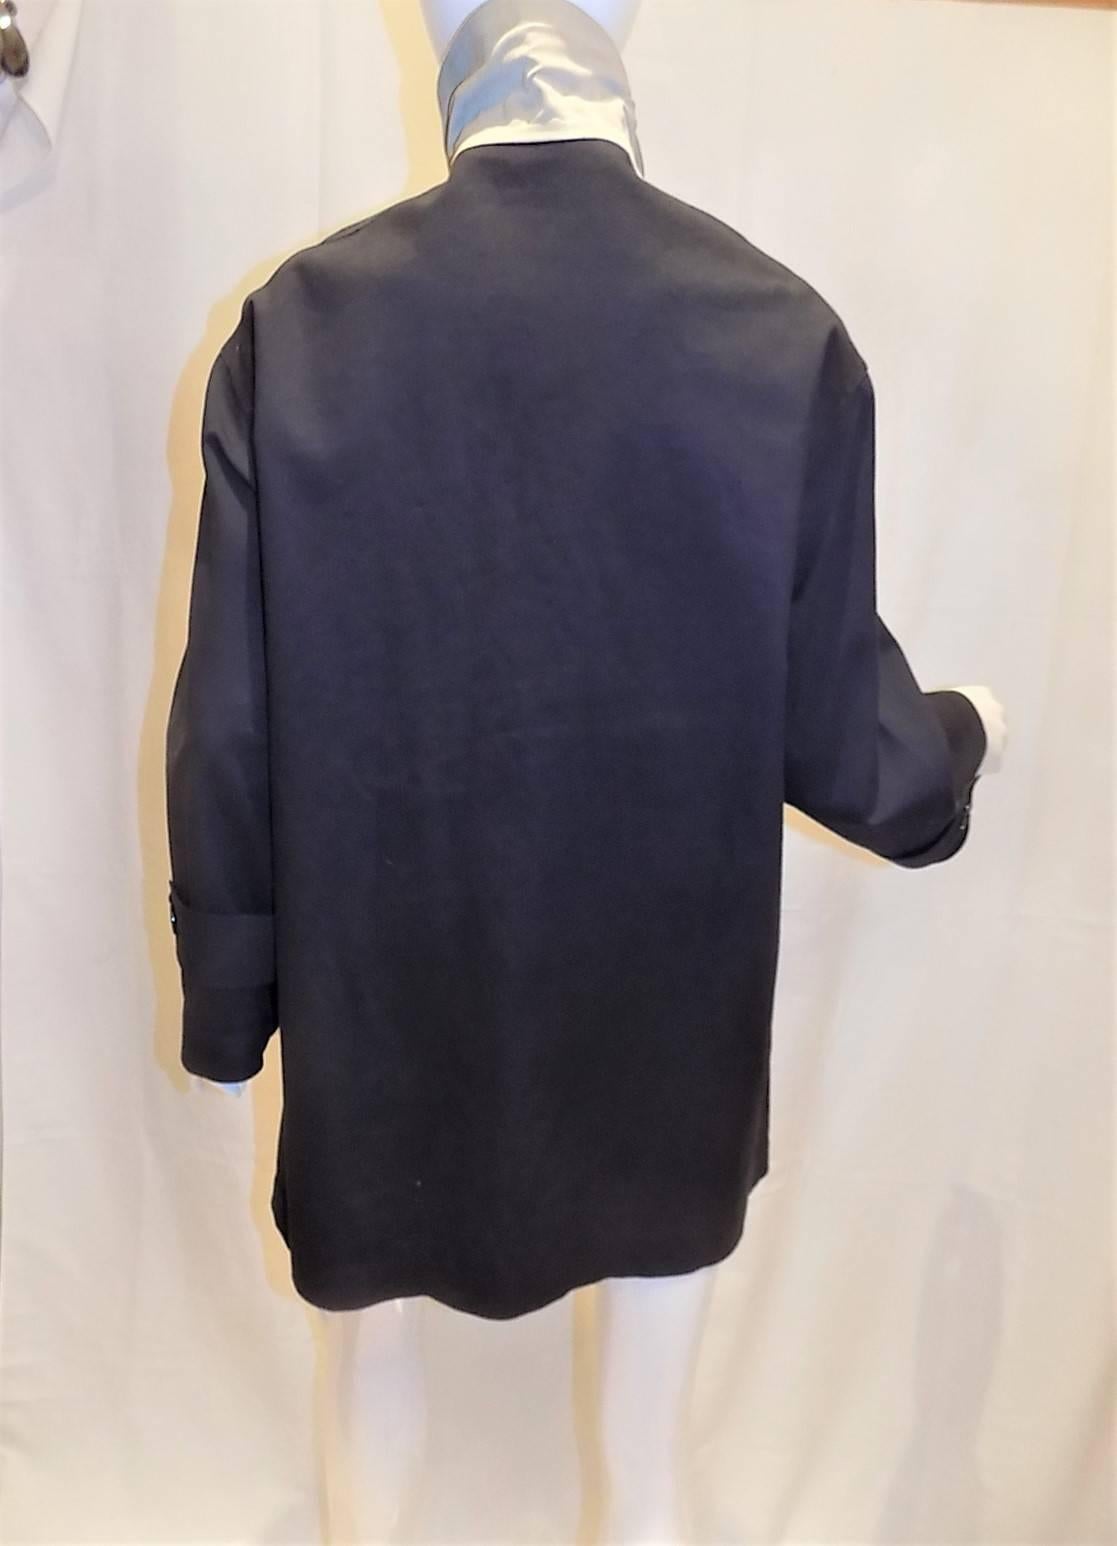 Extremely rare to find Hermes cotton rubber treated rain jacket. Large bone made front buttons engraved Hermes . Underarm vents. Silk lined back and under collar. Two  side pockets. Pristine condition. No signs of any wear. Size 4-6